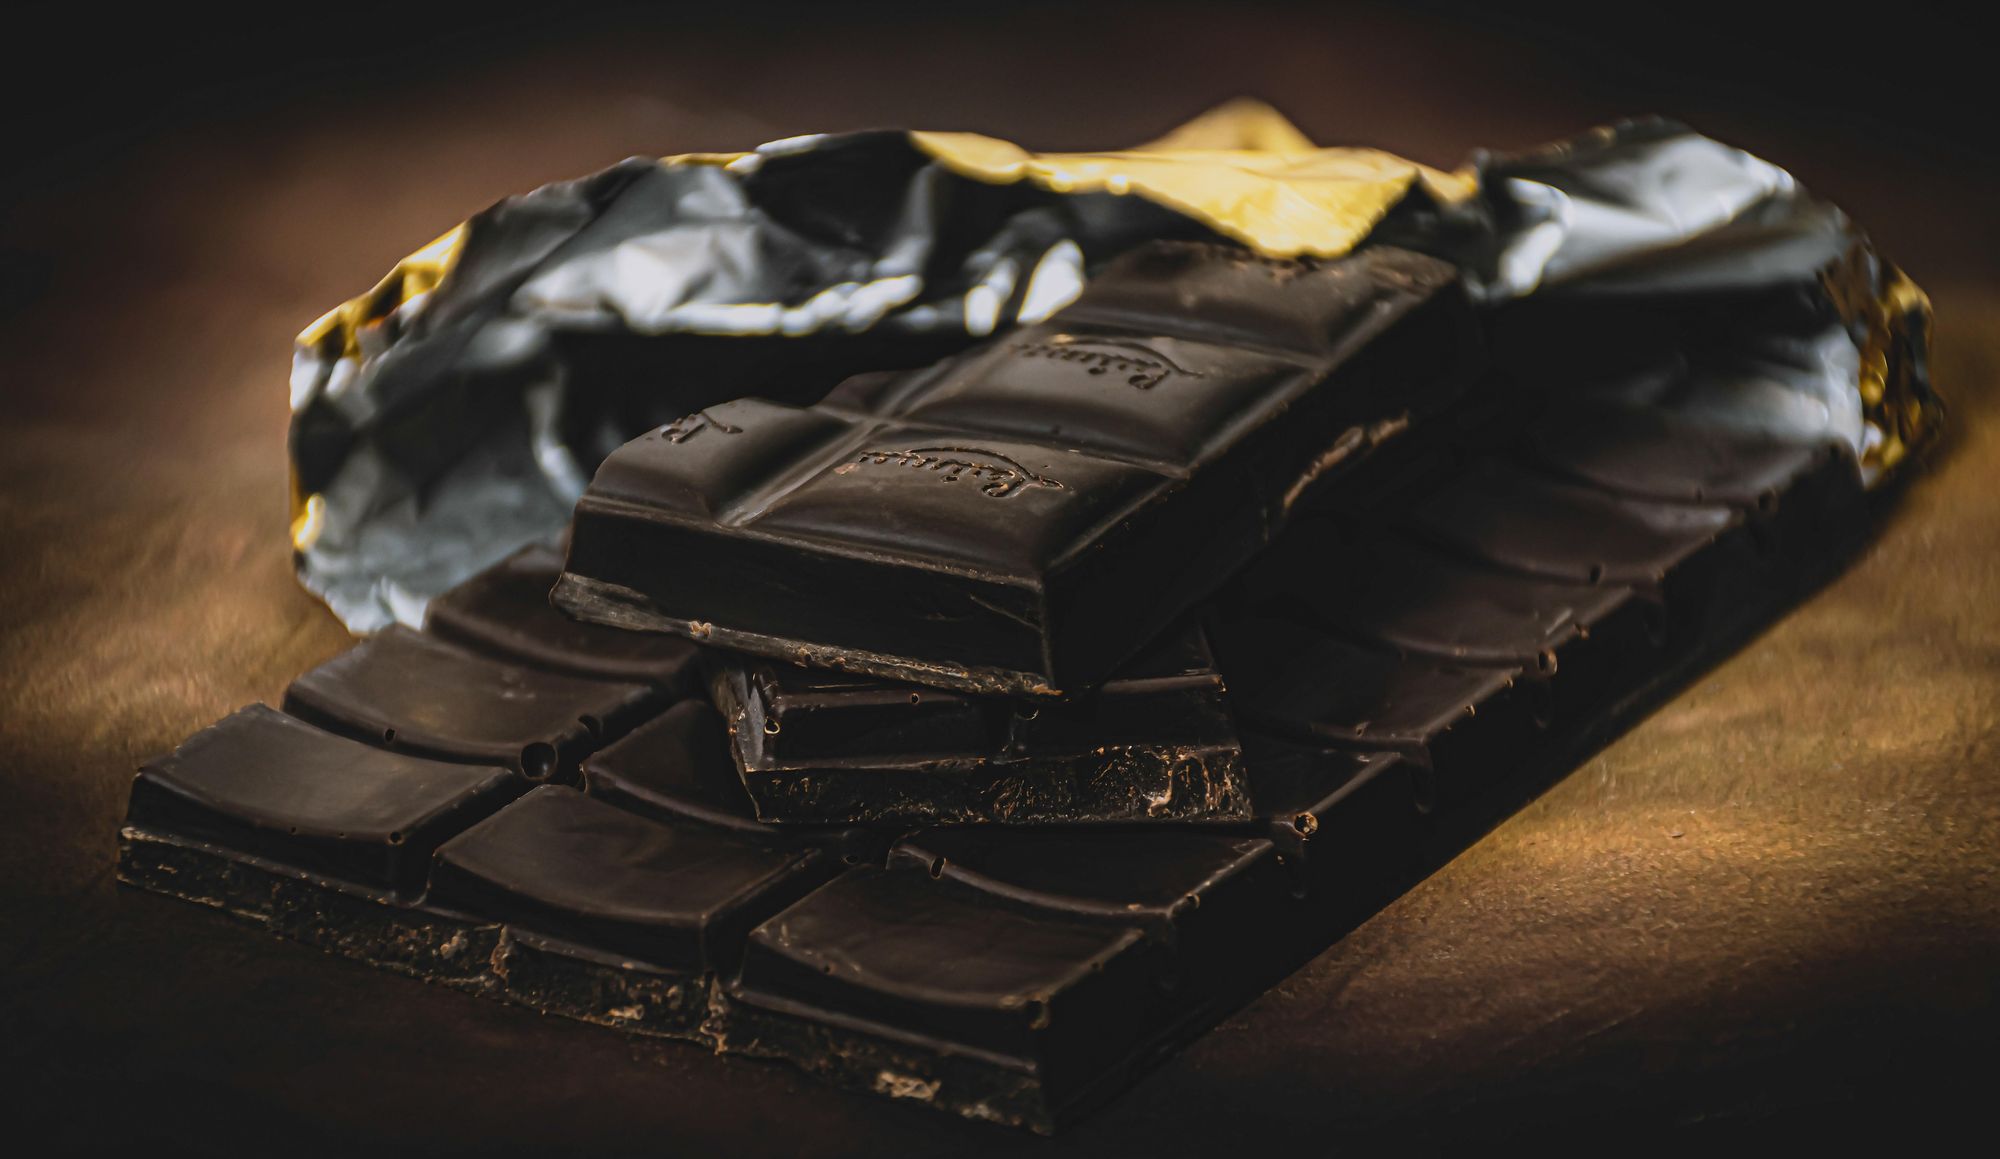 Dark Chocolate can be made a healthy diabetic routine?